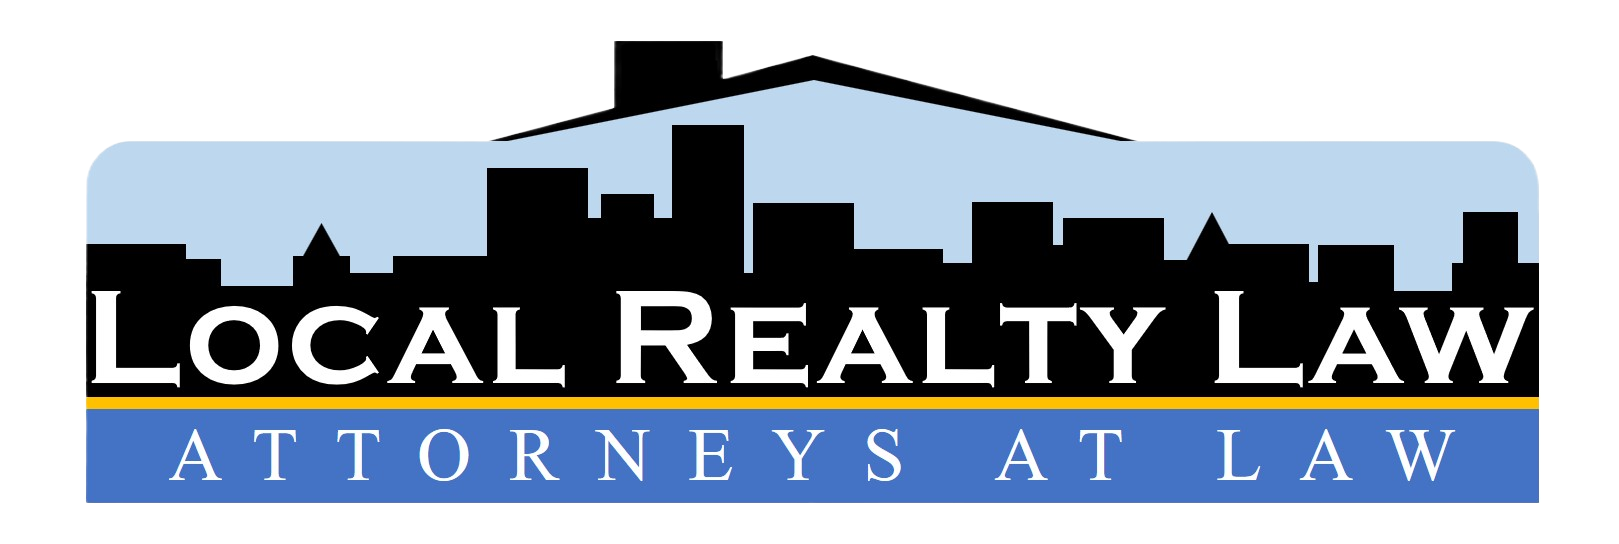 Local Realty Law